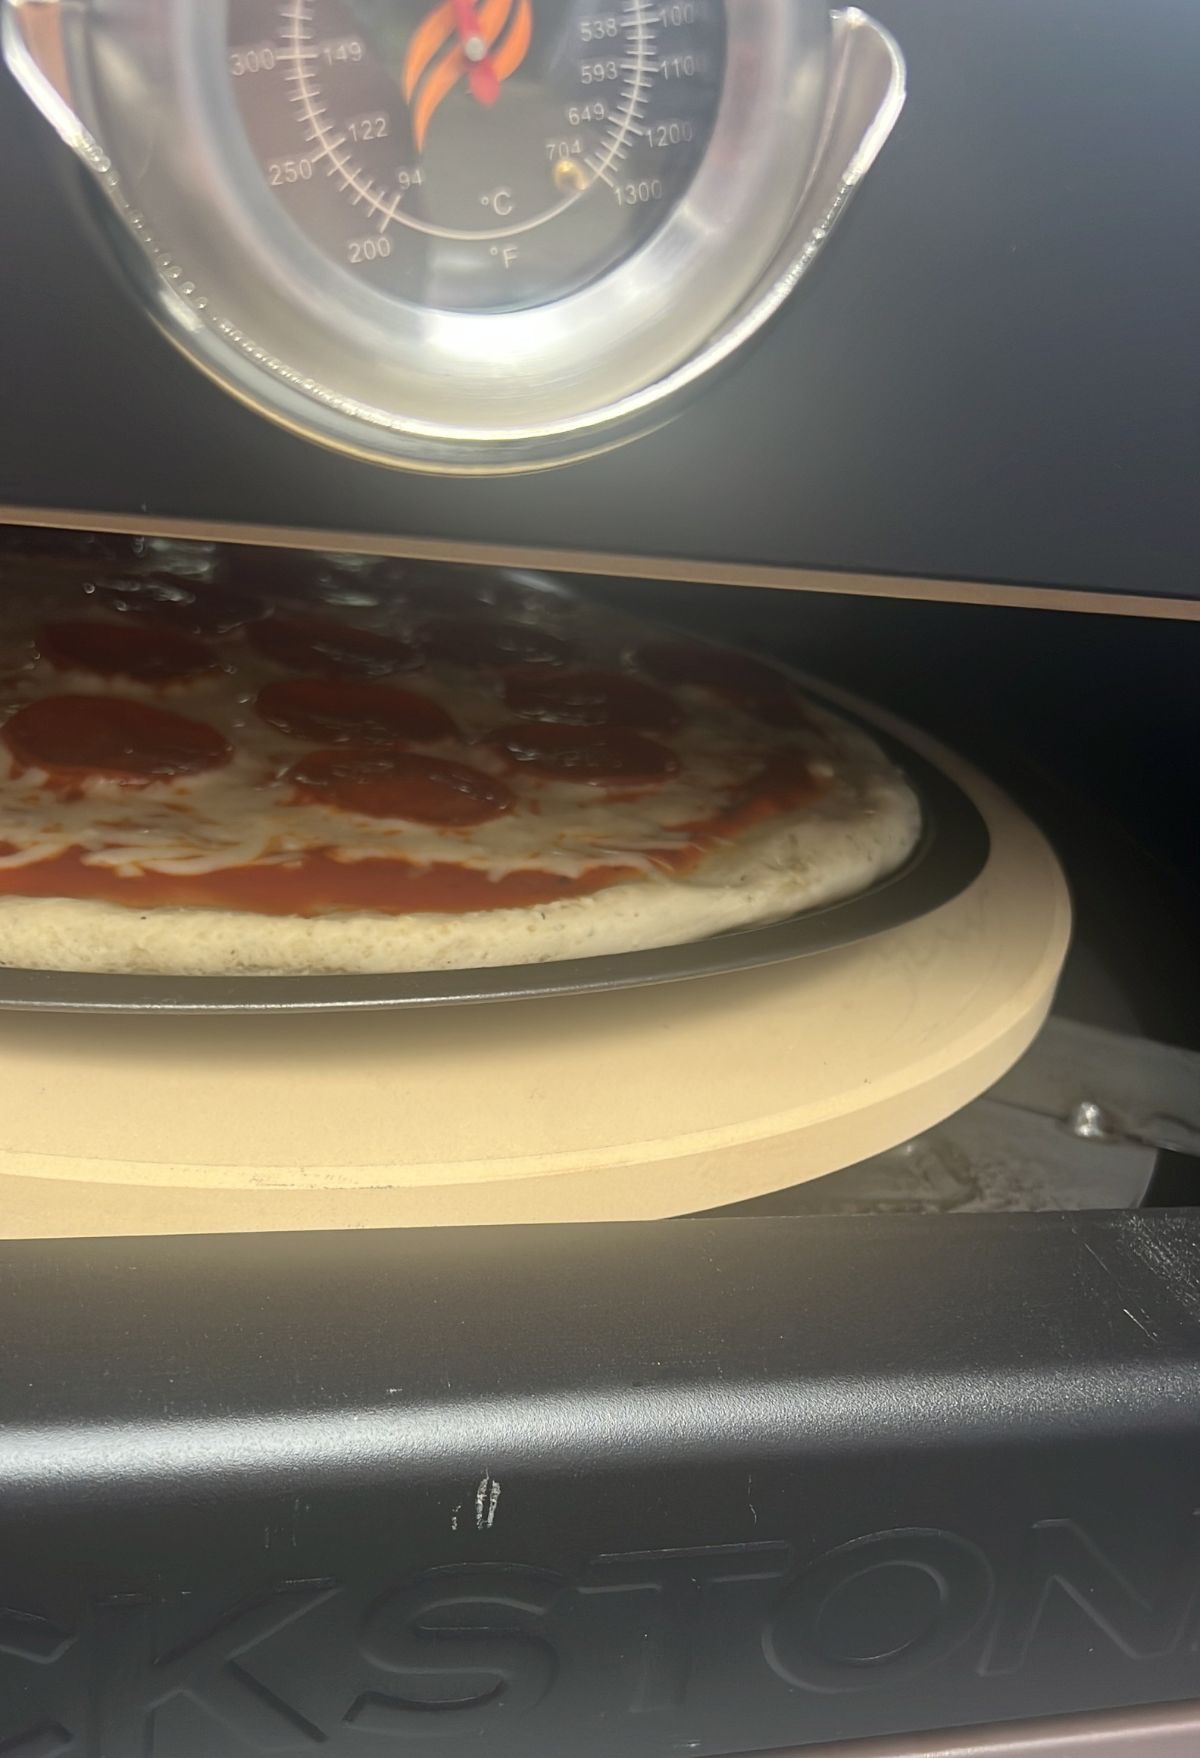 A pizza sitting in a pizza oven.